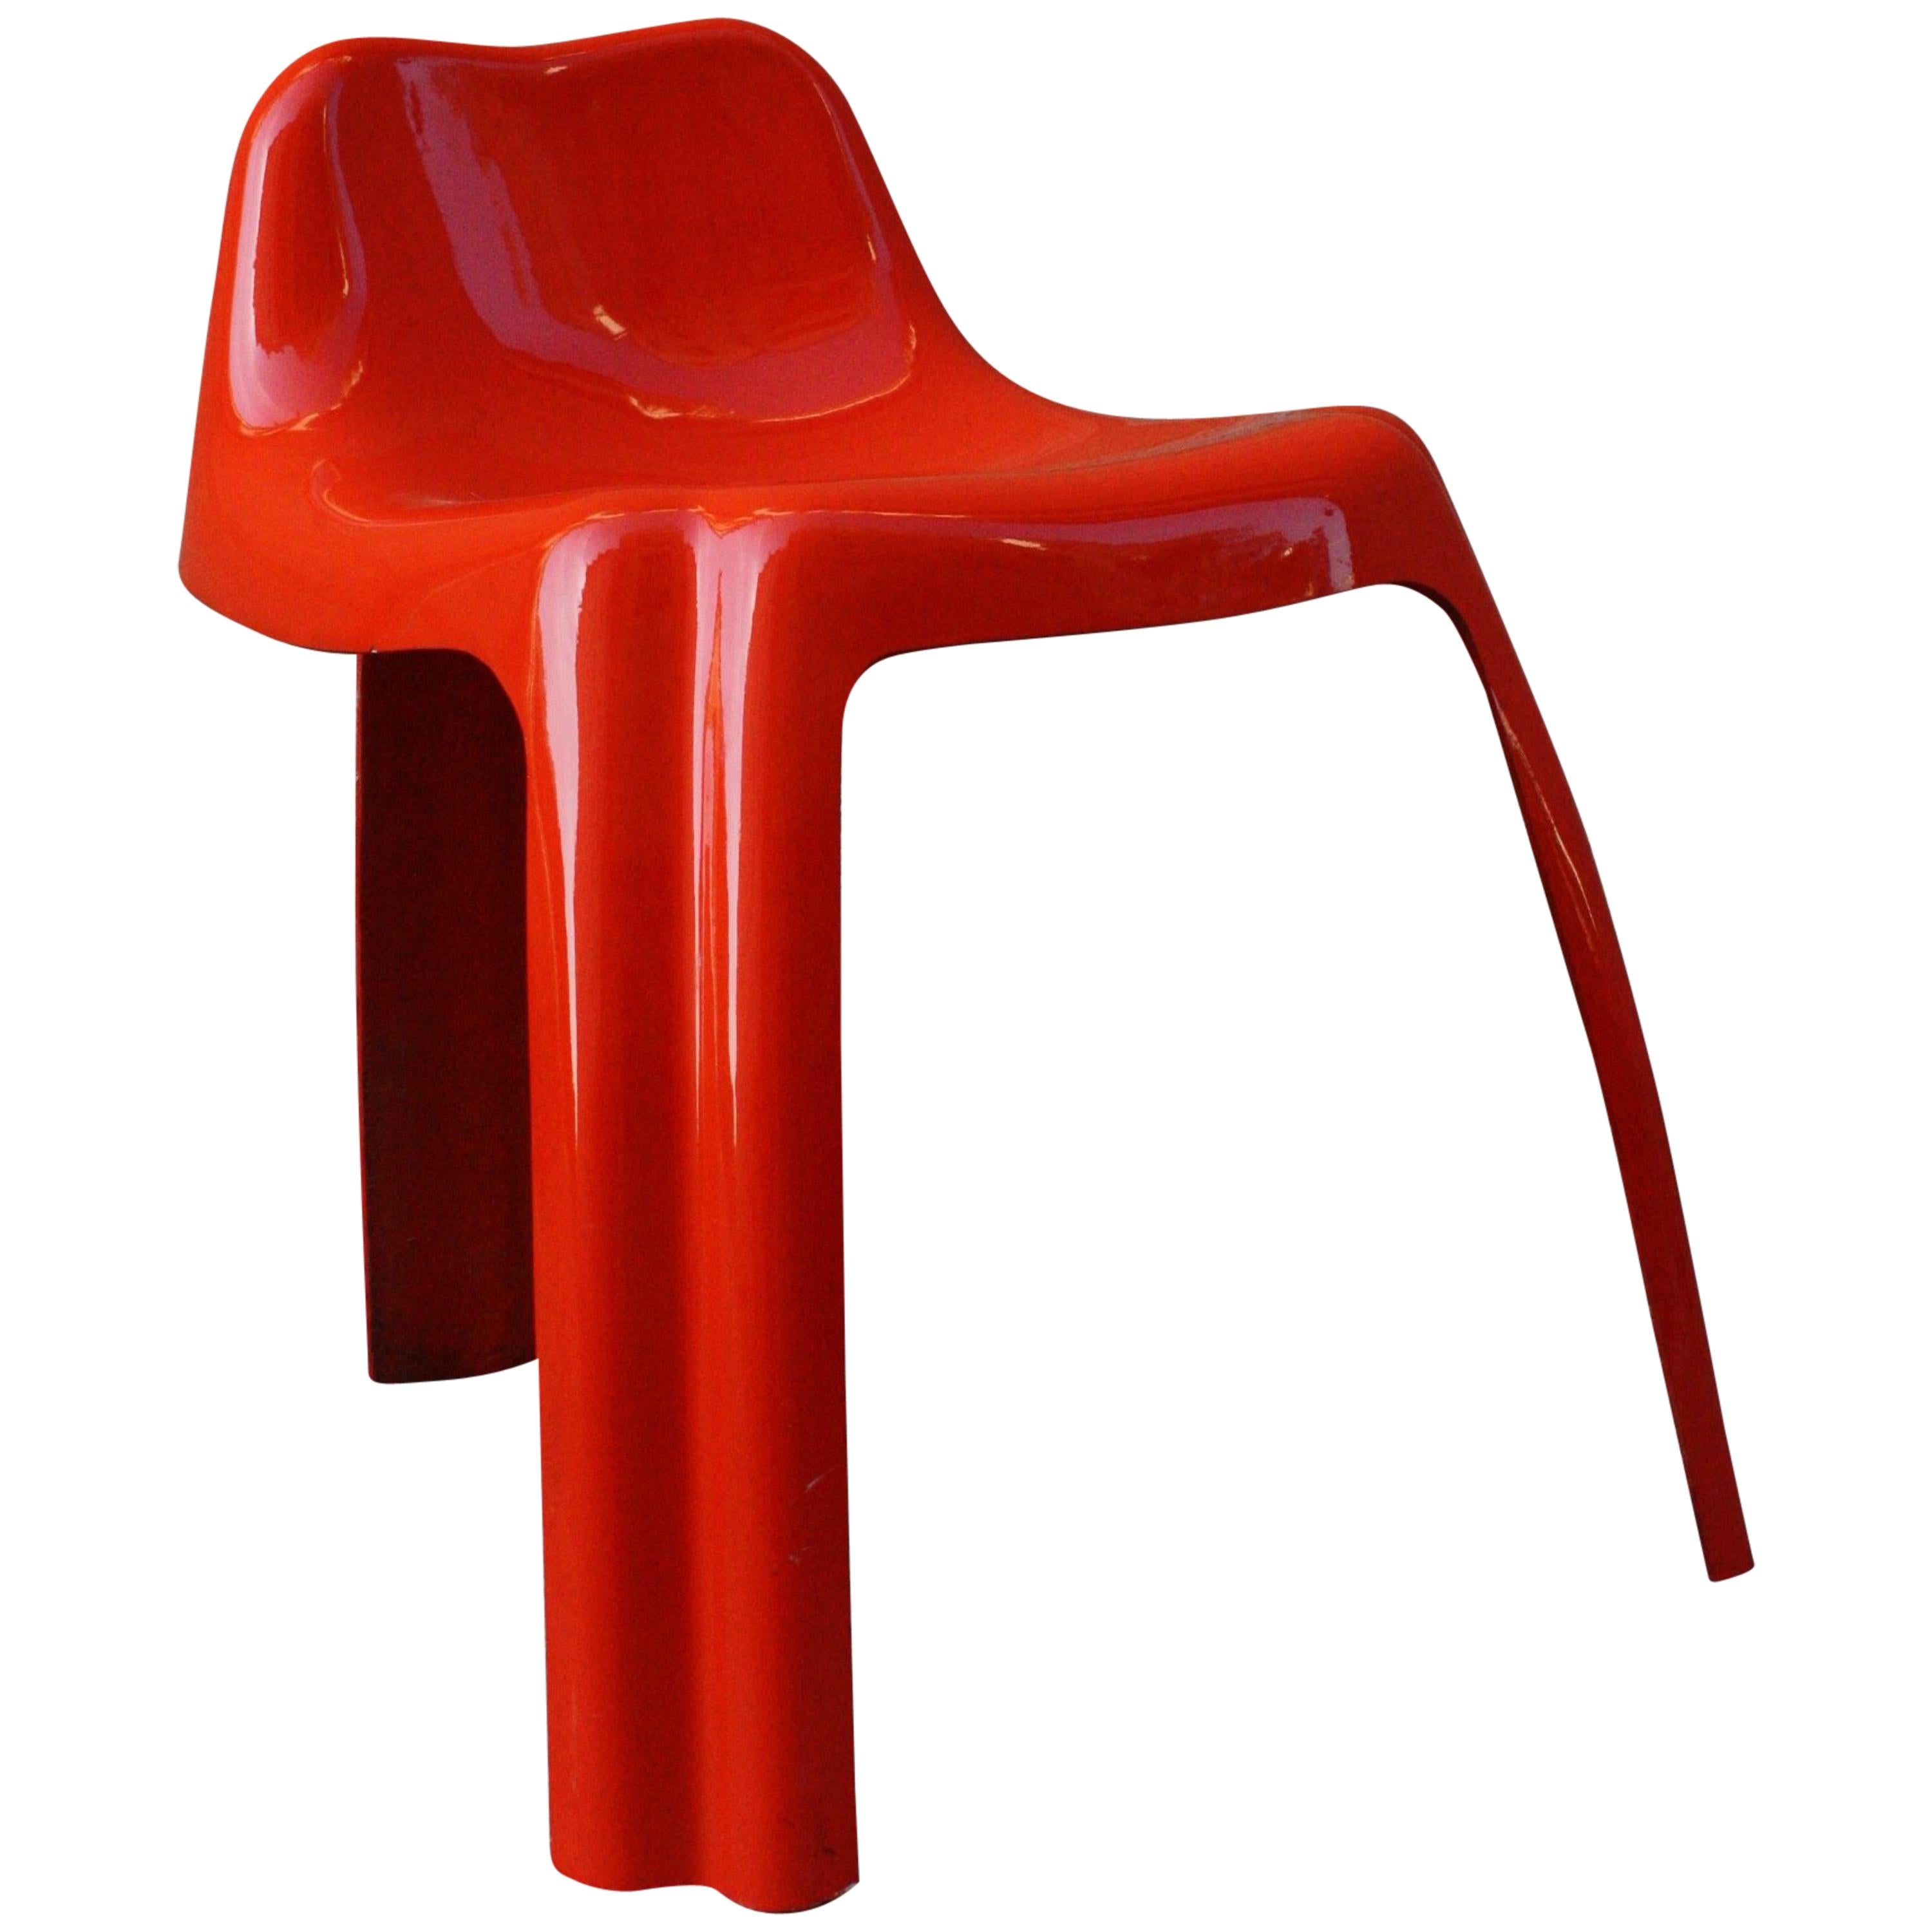 Patrick Gingembre "Ginger" Chair, 1973 For Sale